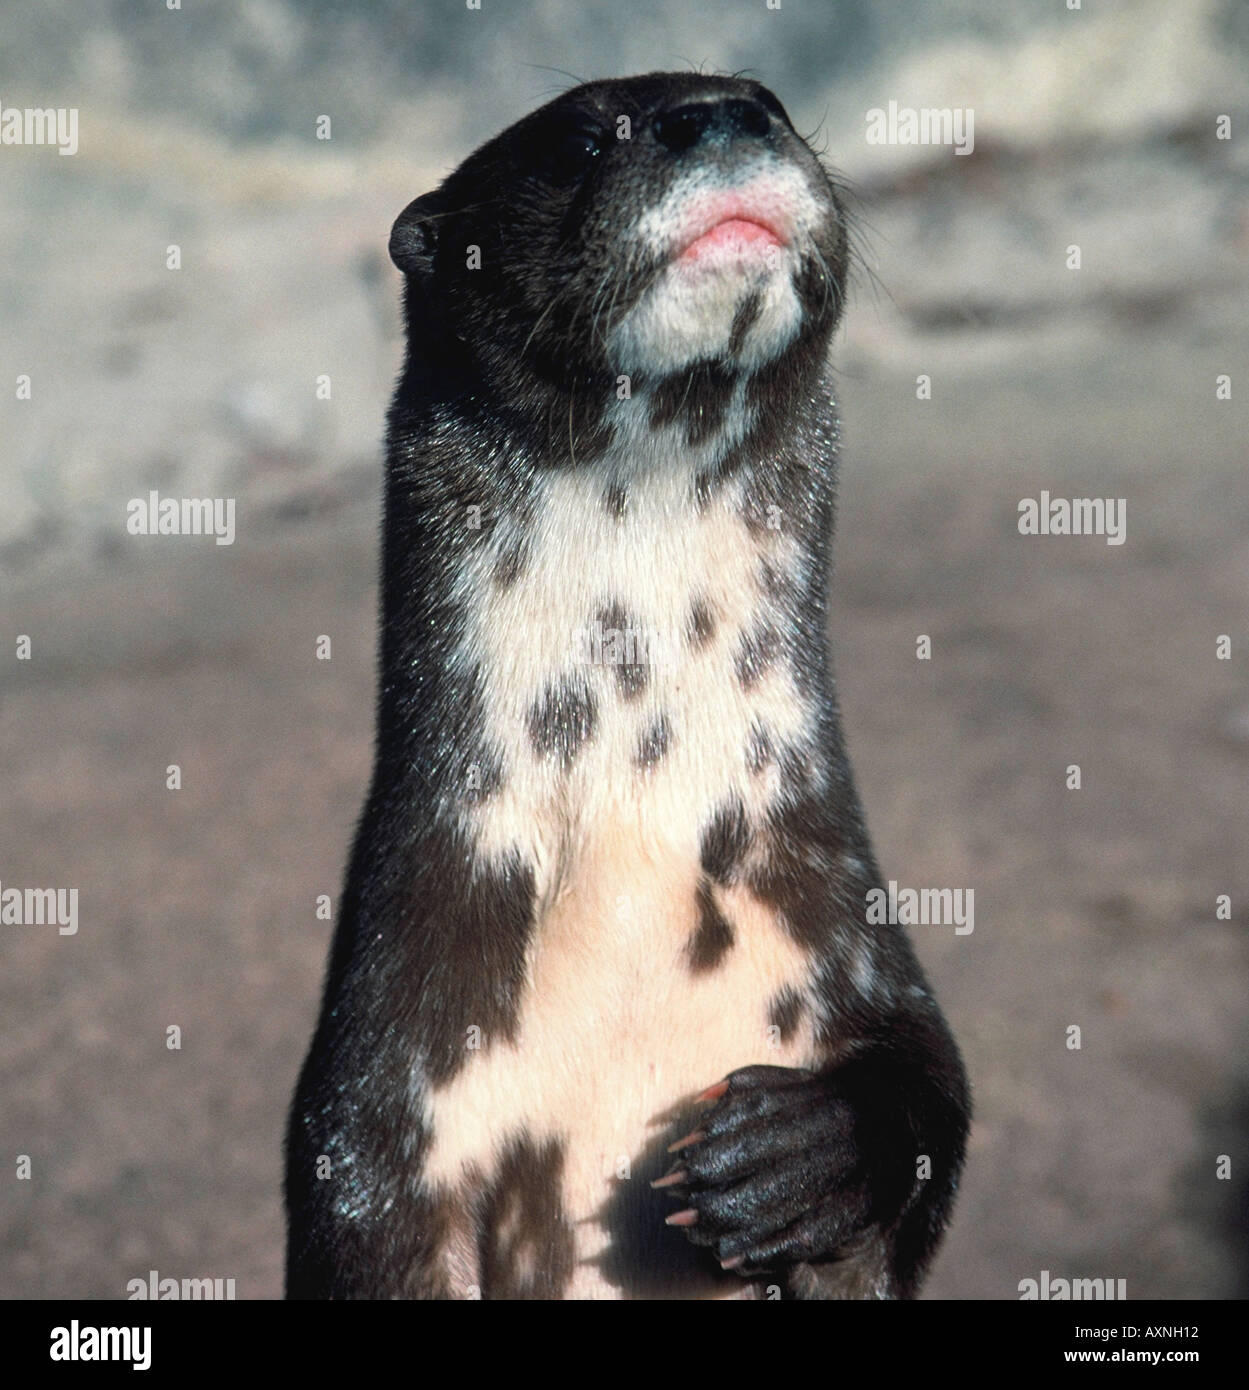 Spotted-Necked Otter, Hydrictis maculicollis Stock Photo